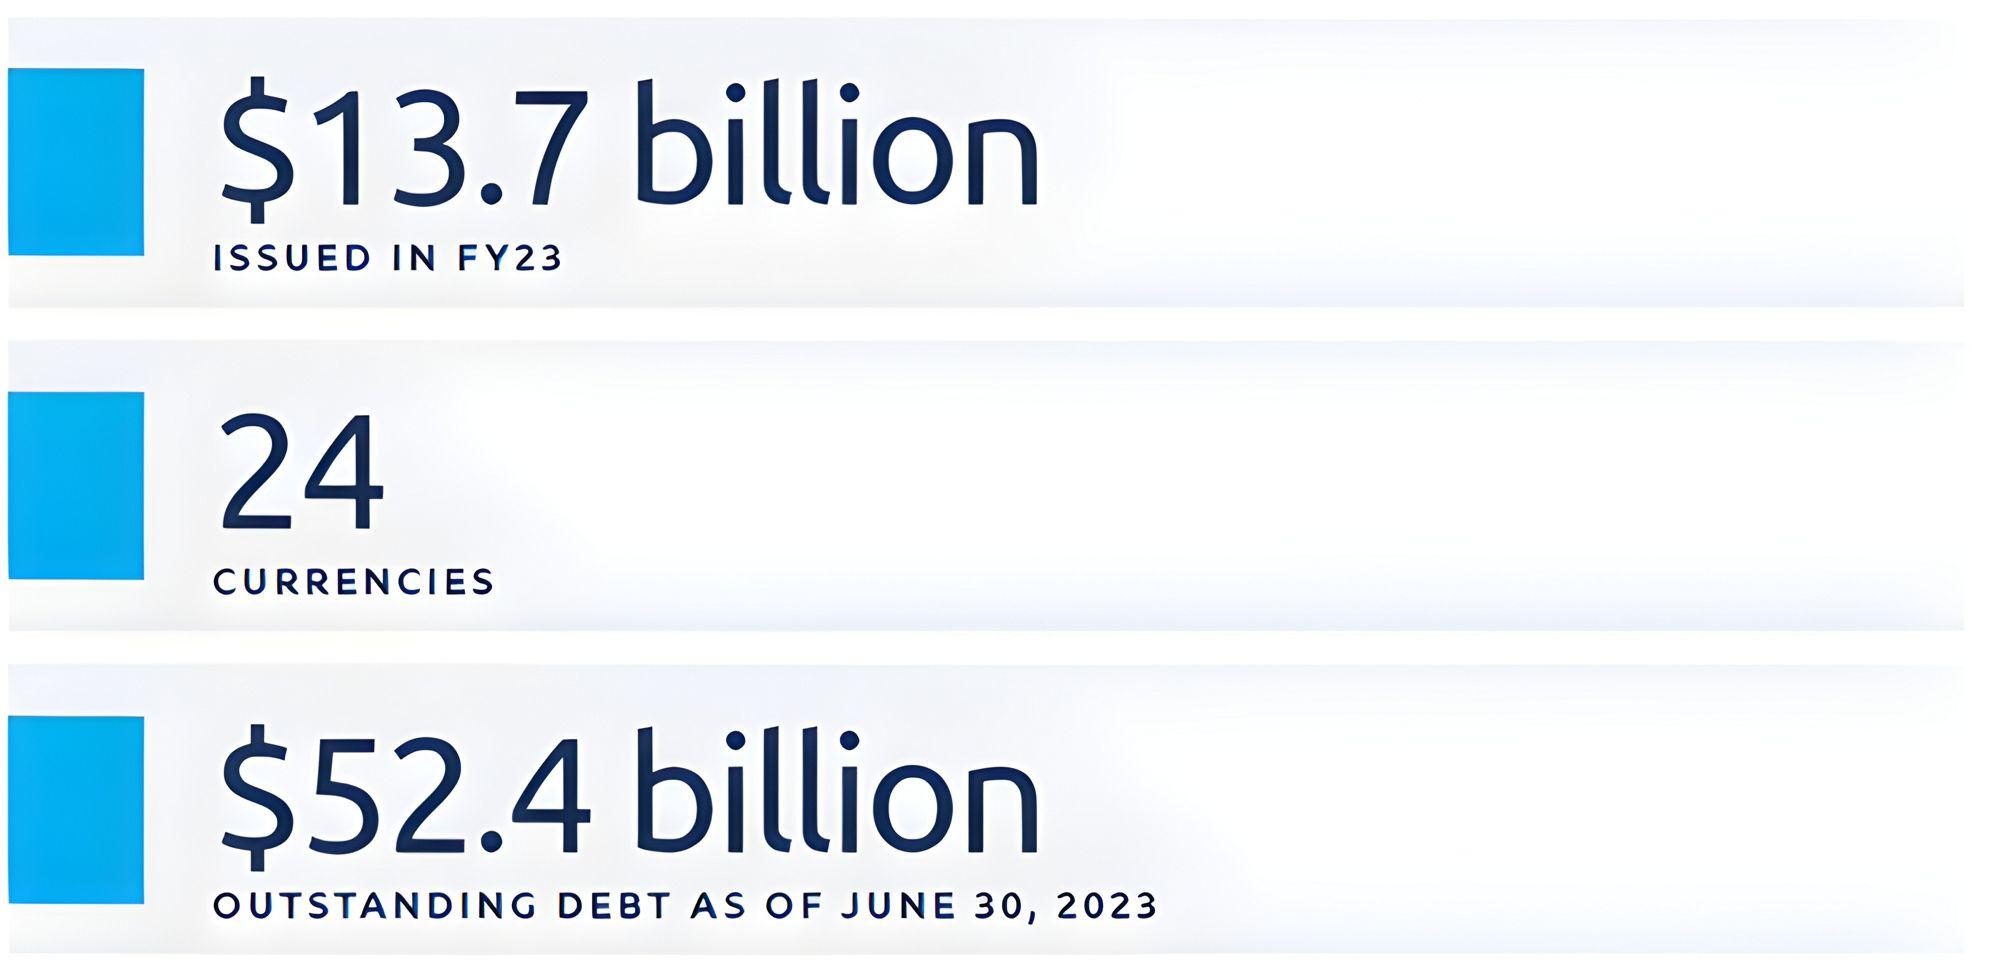 In FY23, IFC raised $13.7 billion in medium to long-term borrowing across 24 currencies, with outstanding debt totaling $52.4 billion as of June 30, 2023.